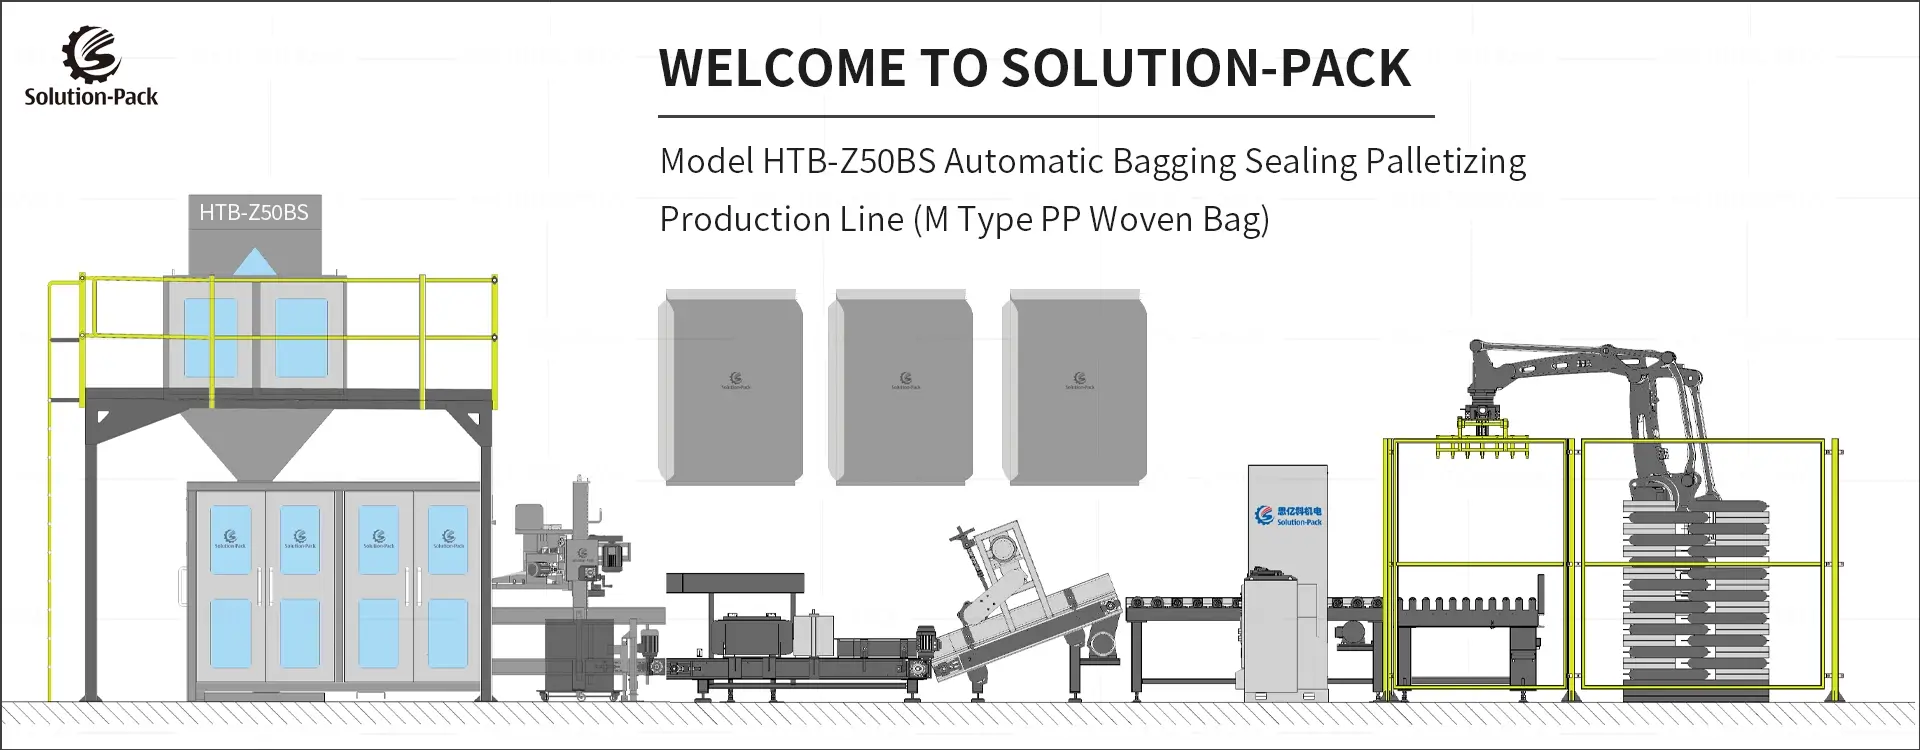 Model HTB-Z50BS Bagging Palletizing Production Line for M-Type PP Woven Bags | Solution-Pack (Heading Banner Picture)